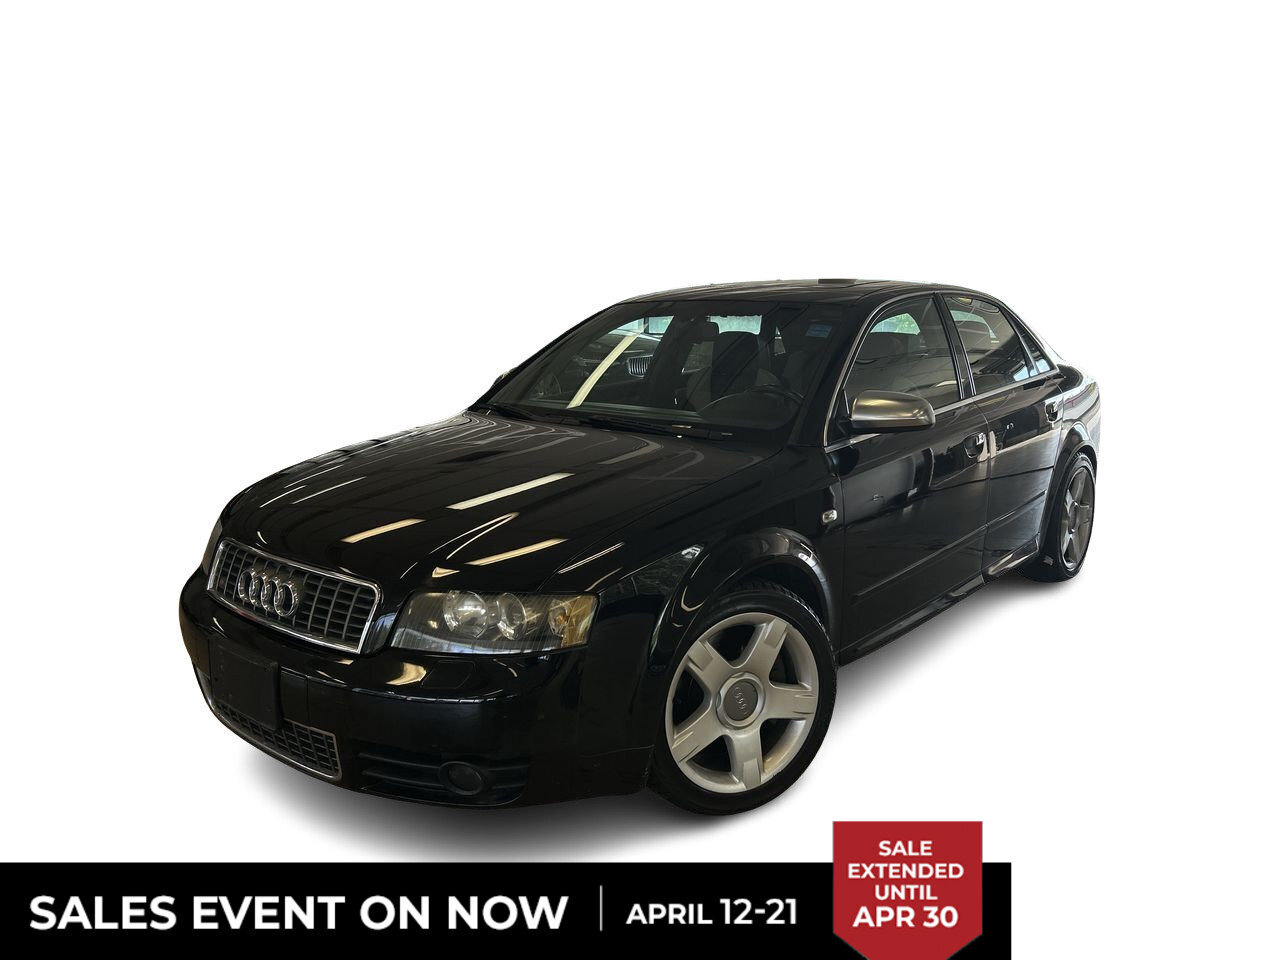 2004 Audi S4 Sdn 6sp man Qtro | Dilawri Pre-Owned Event ON Now!